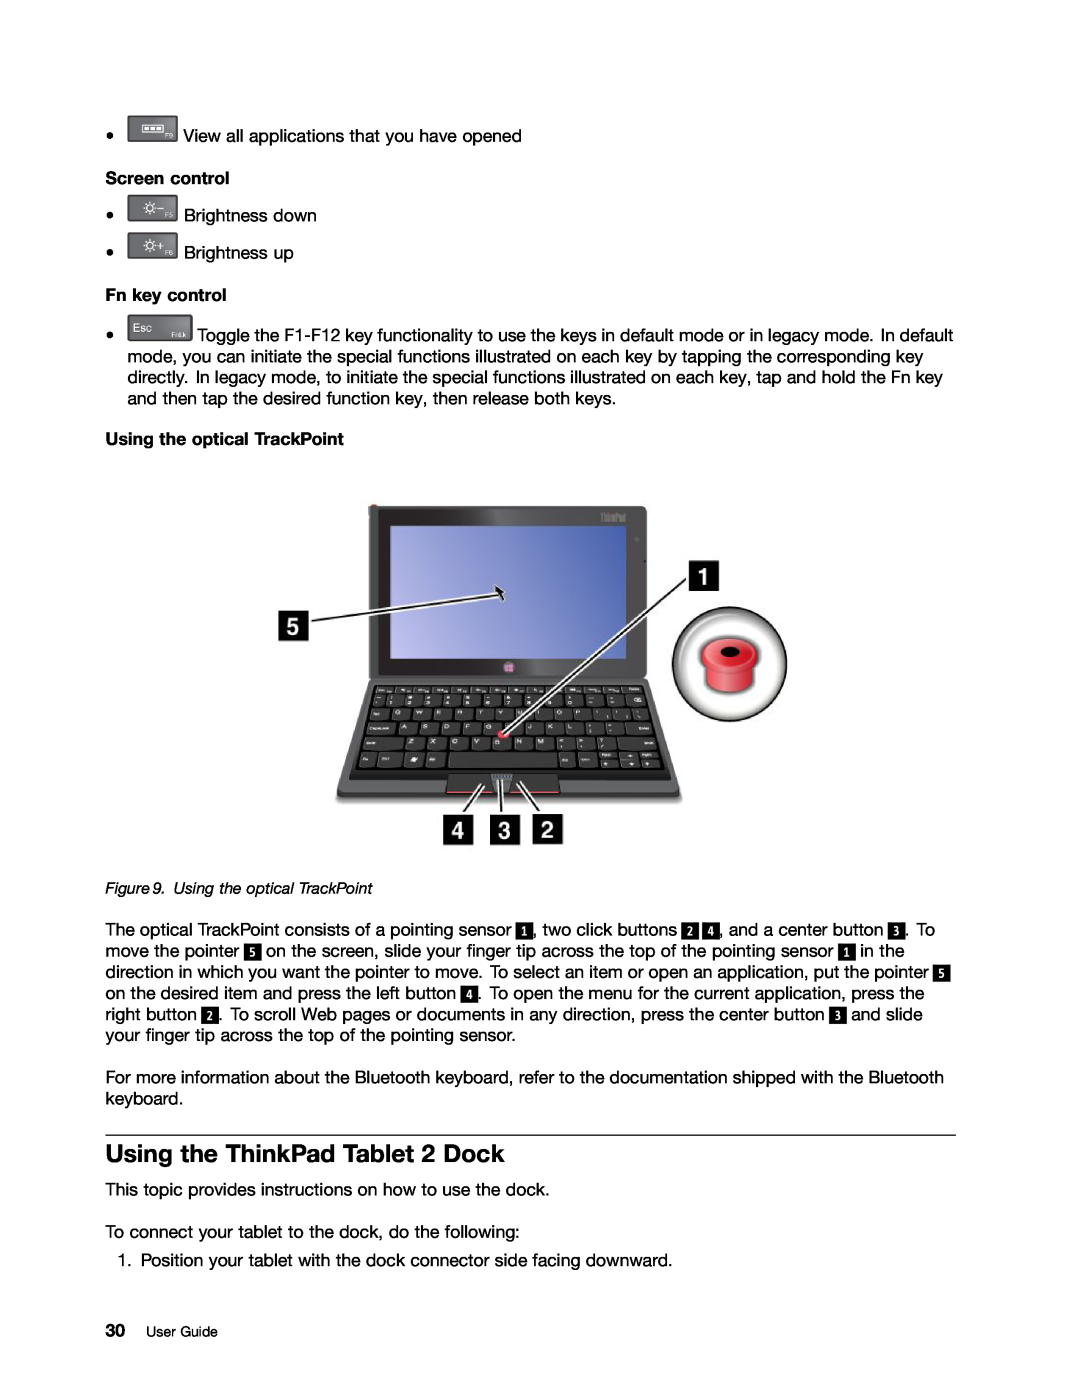 Lenovo 36795MU, 36822AU Using the ThinkPad Tablet 2 Dock, Screen control, Fn key control, Using the optical TrackPoint 